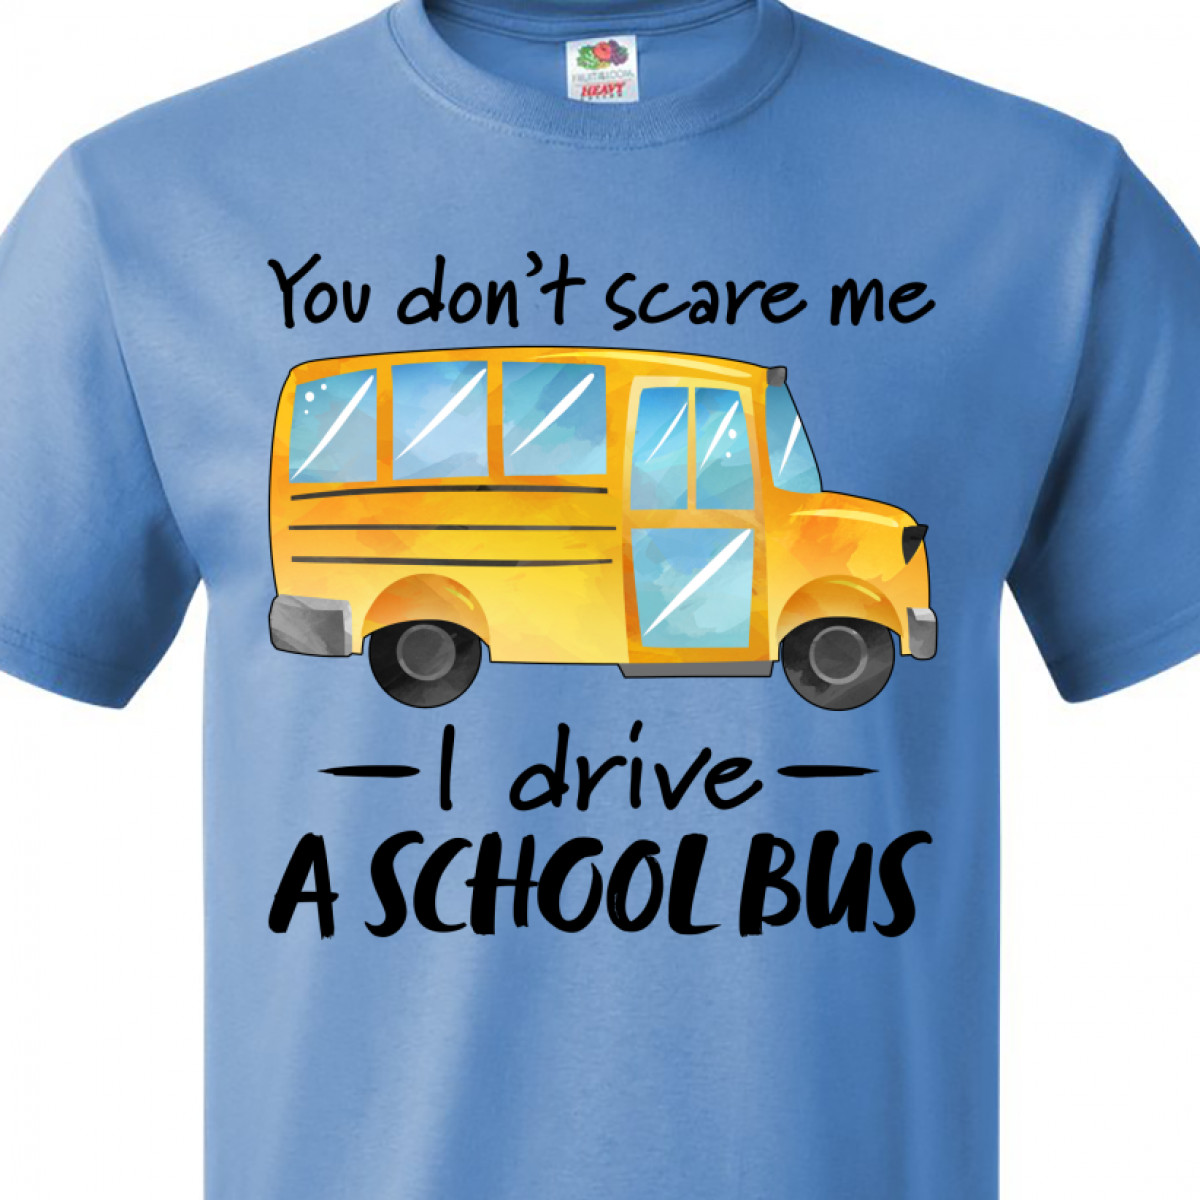 Inktastic You Don't Scare Me- I Drive a School Bus T-Shirt - image 3 of 4